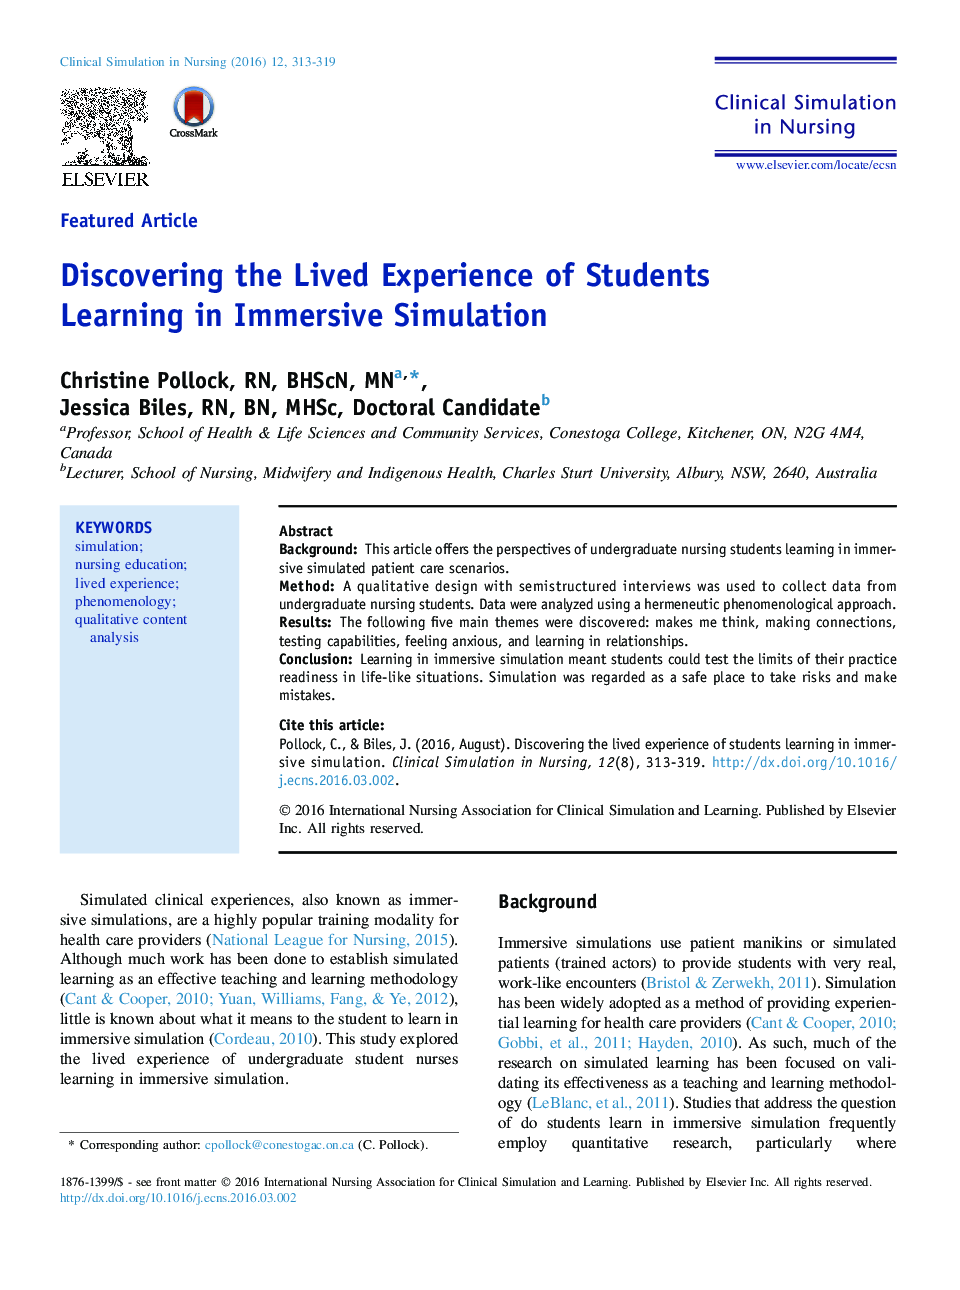 Discovering the Lived Experience of Students Learning in Immersive Simulation